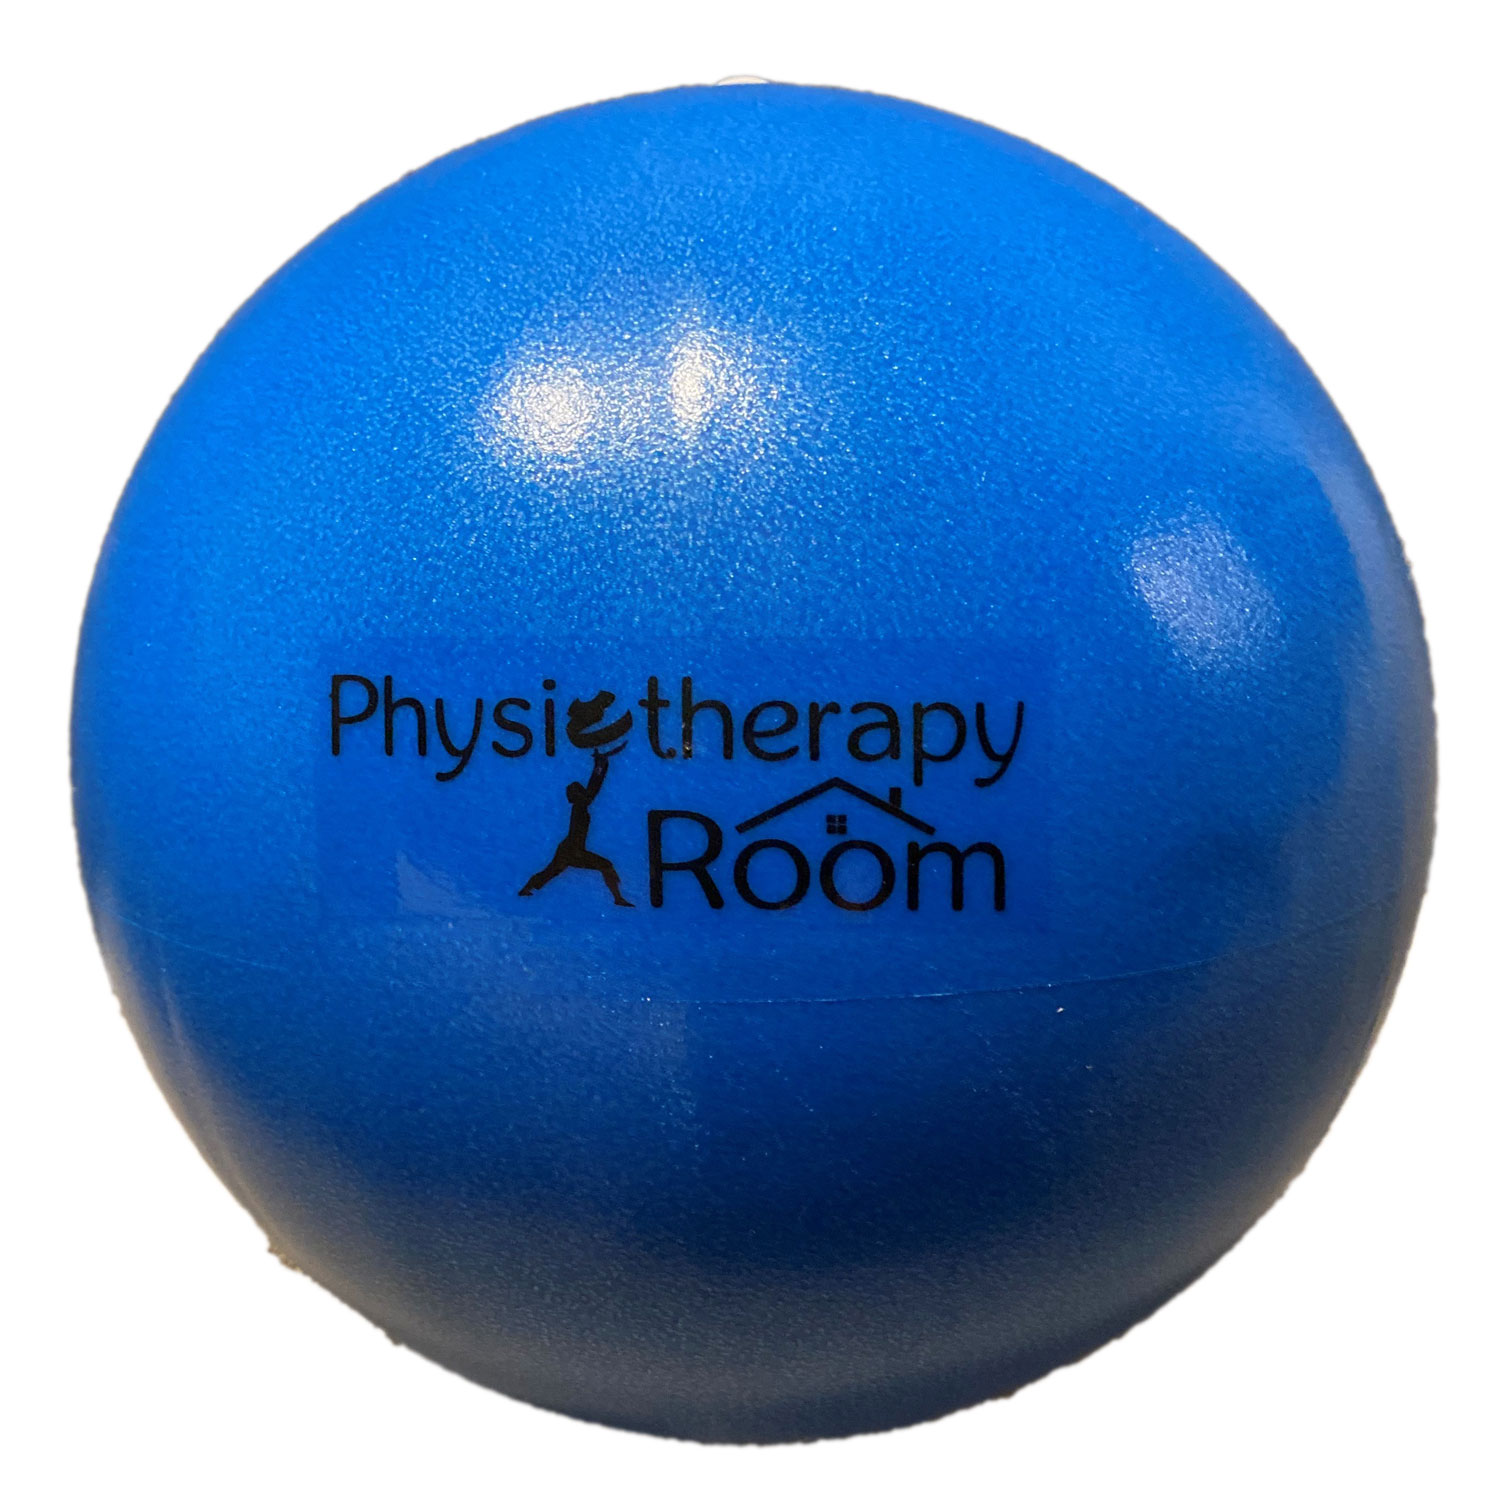 Physiotherapy Room Soft Mini Exercise Ball